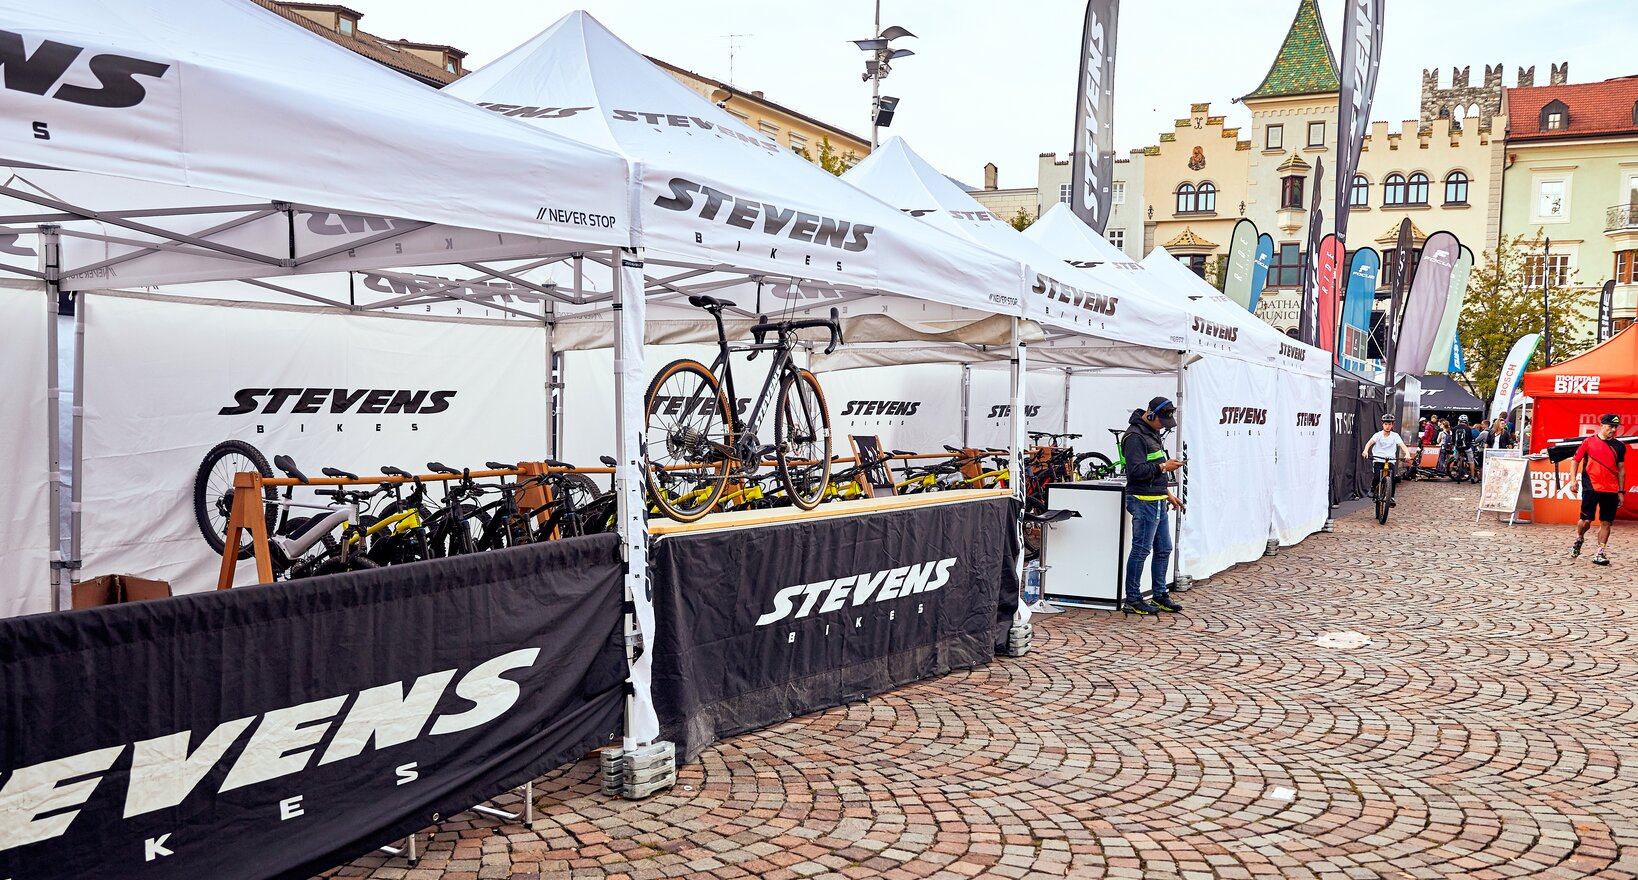 The Stevens Bikes promotion tent is a 4x4 m folding gazebo in white. The side walls are black and white. The bikes are located under the folding gazebo.